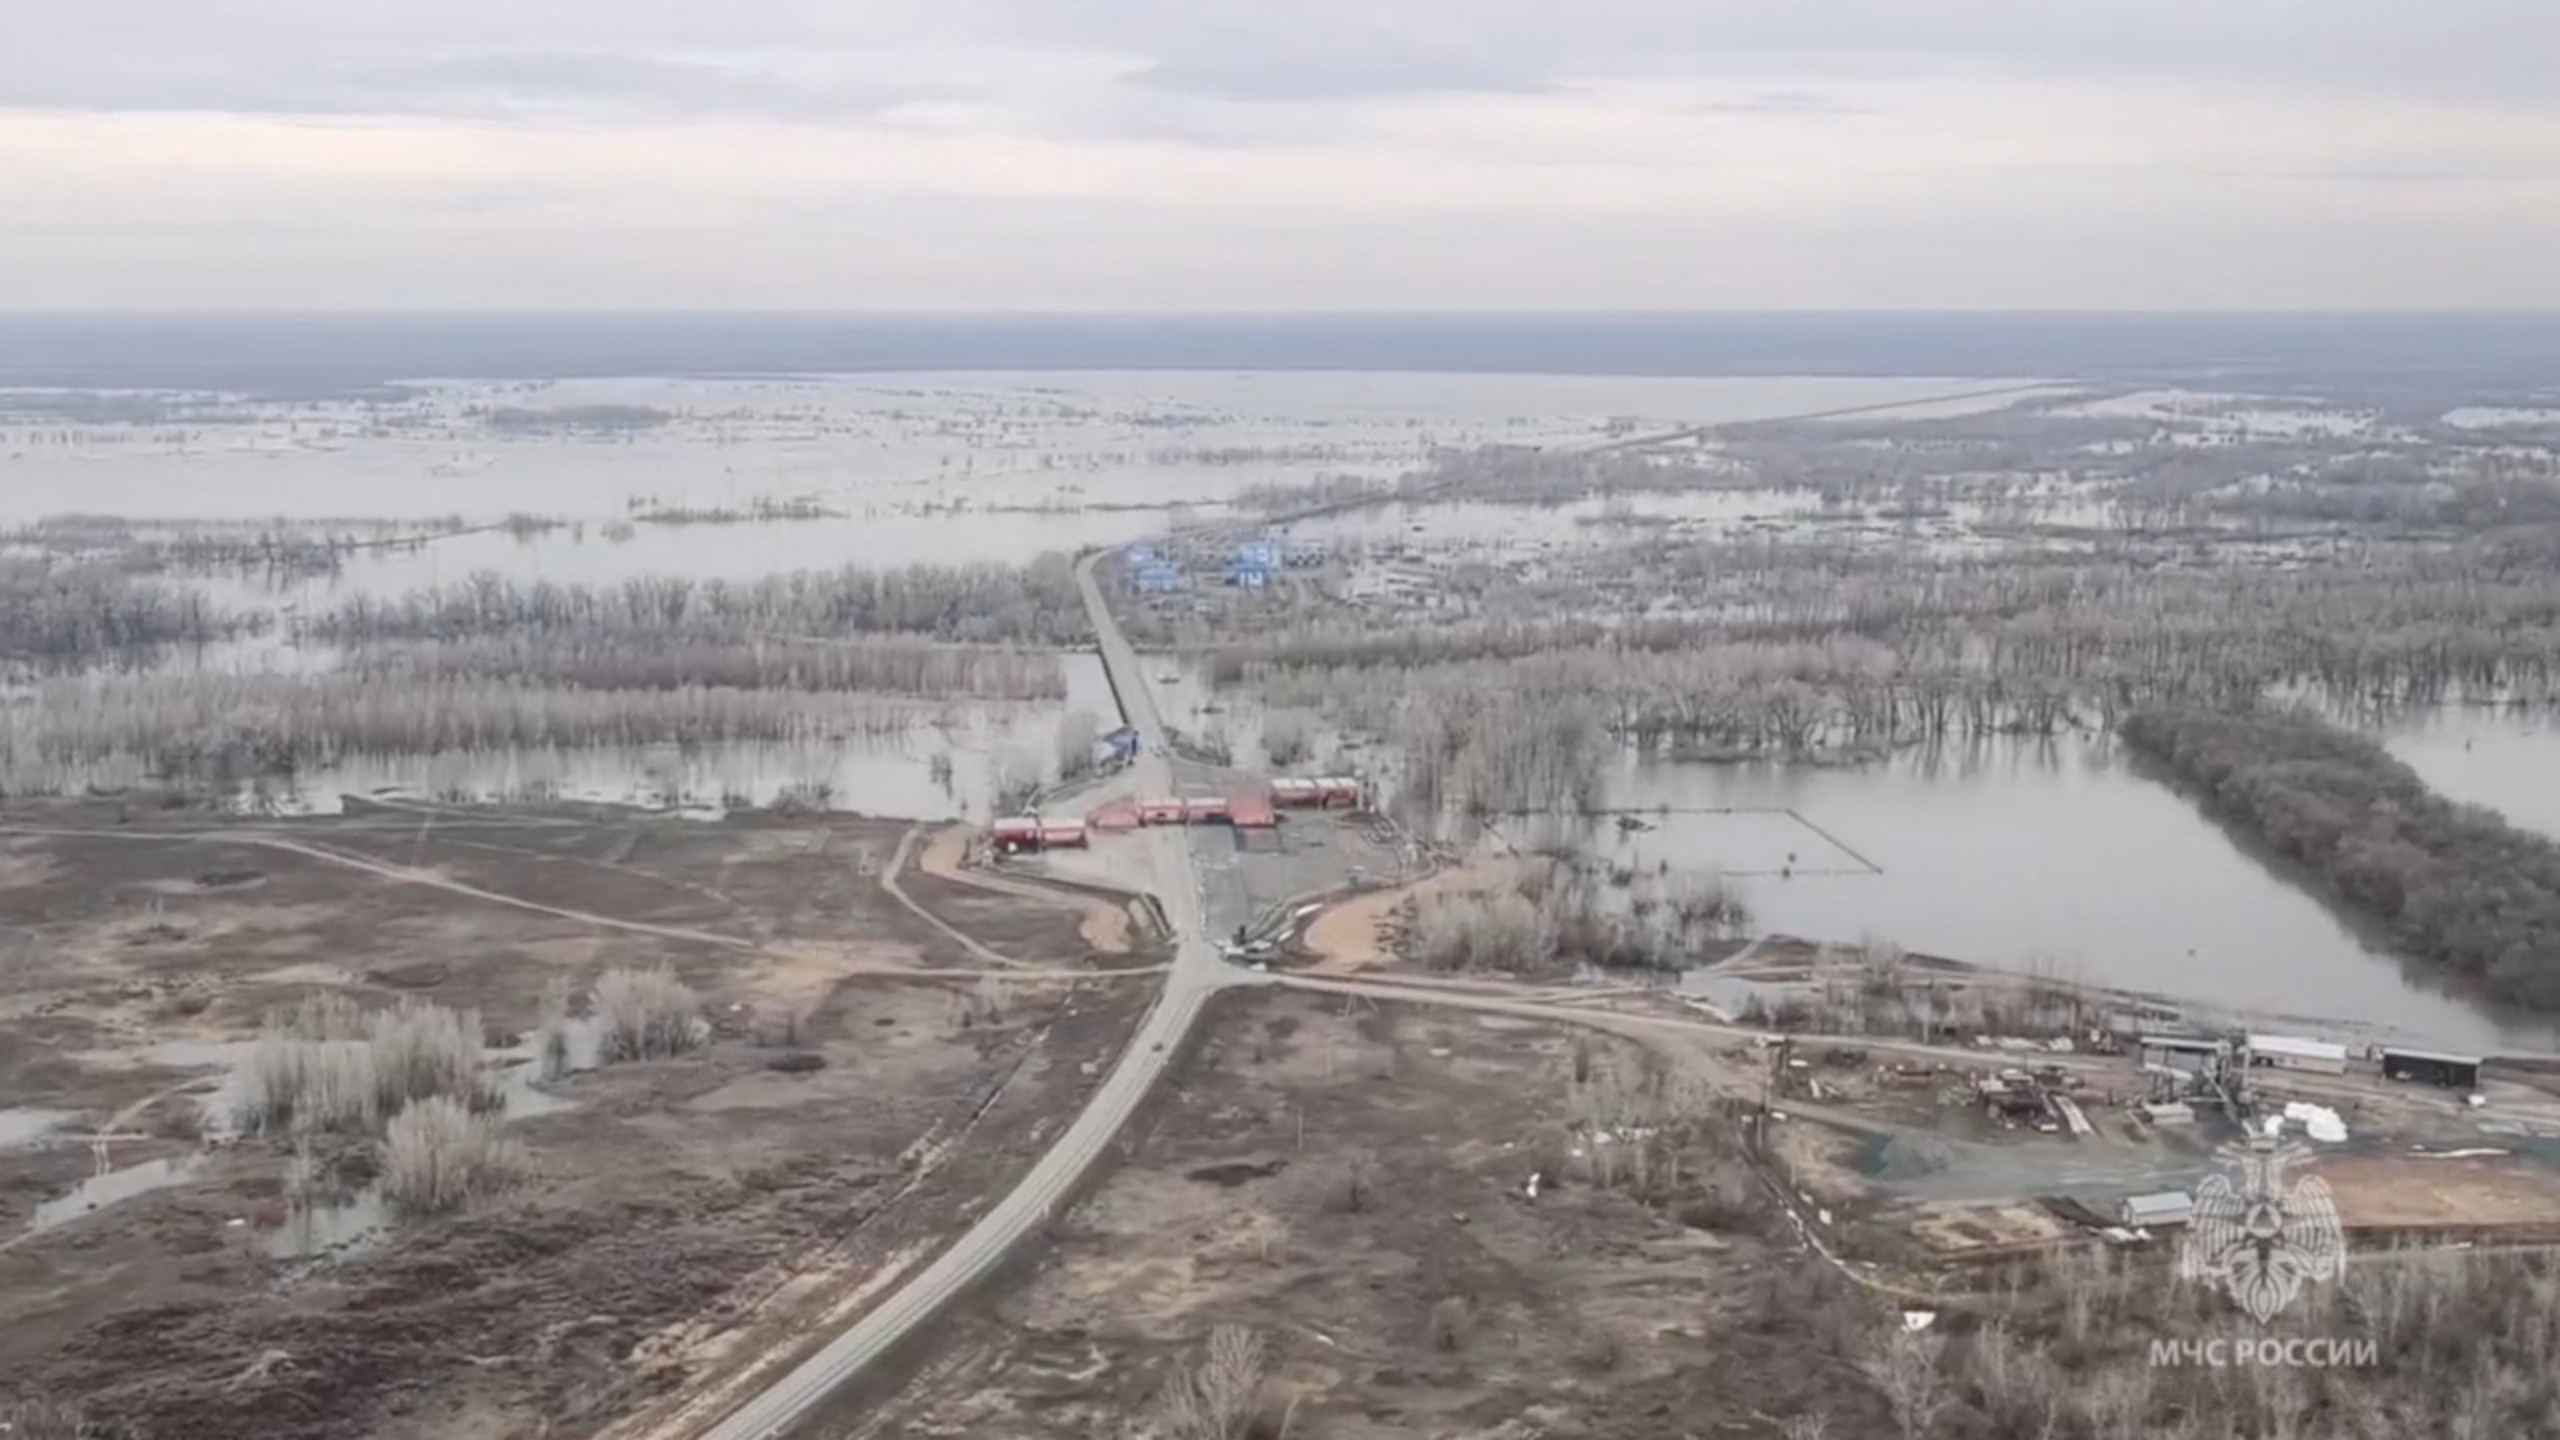 A view from a helicopter shows a flooded area in the Orenburg Region